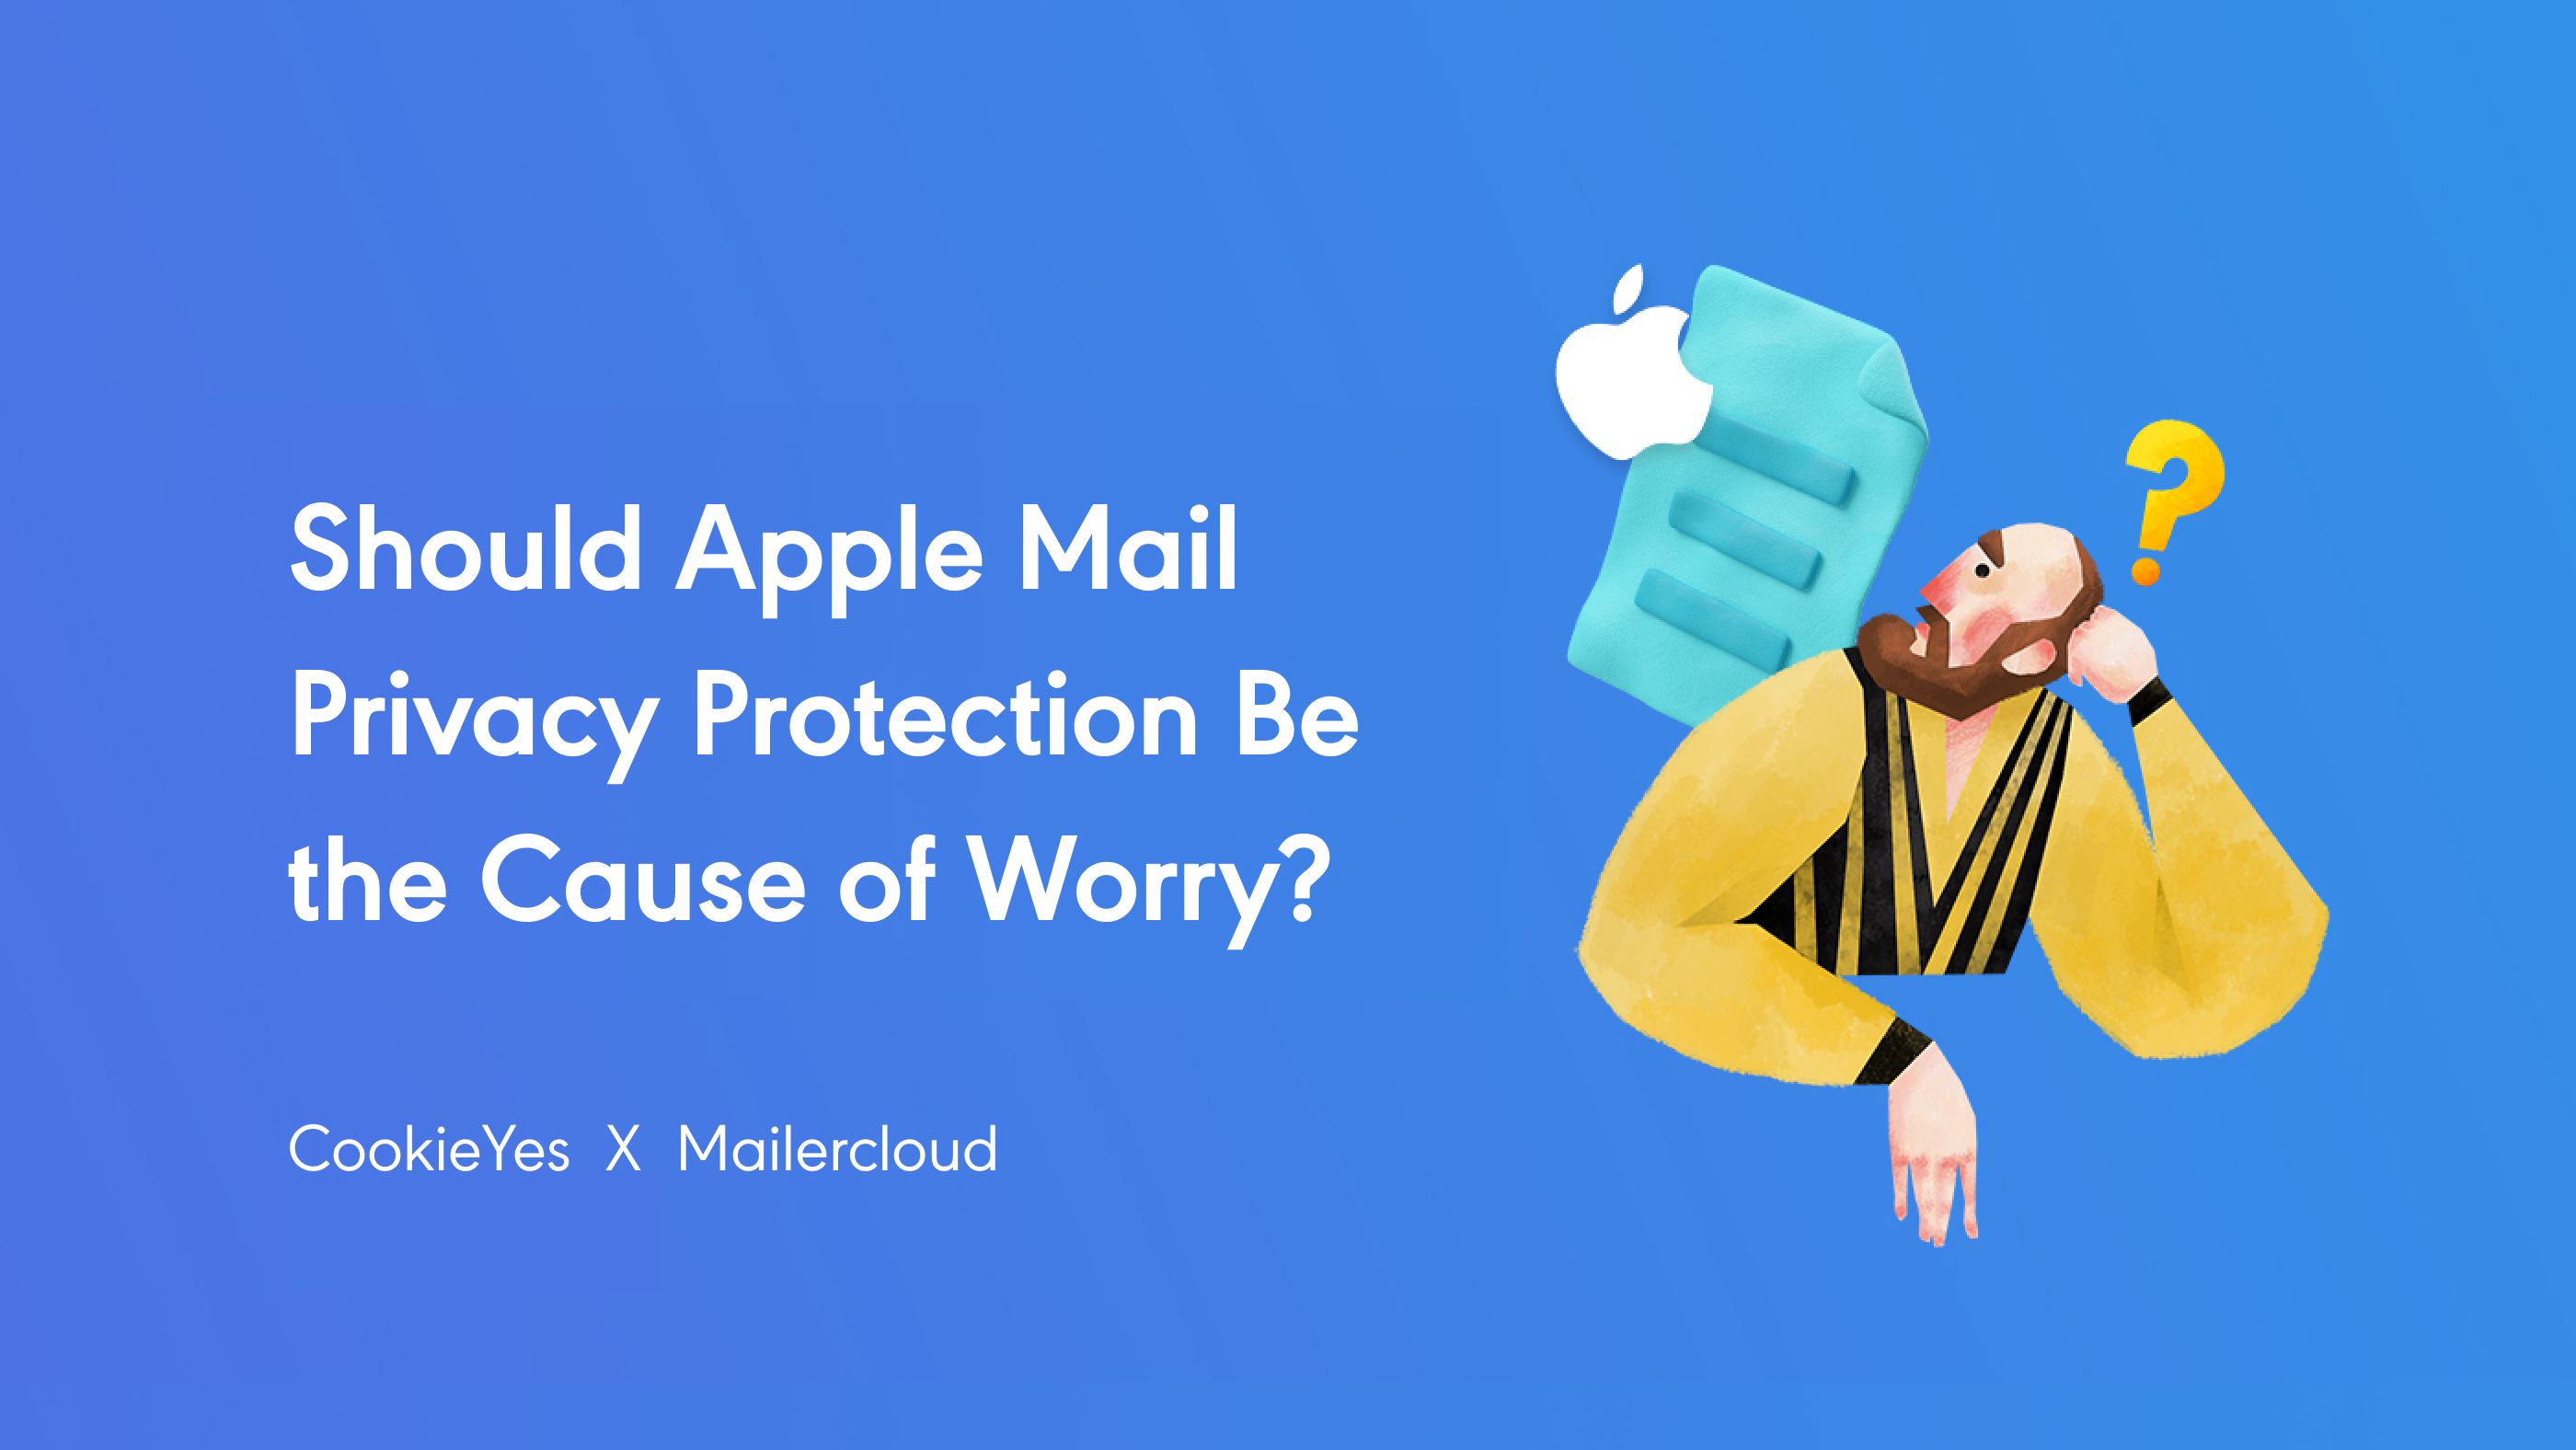 Should Apple Mail Privacy Protection be the Cause of Worry?